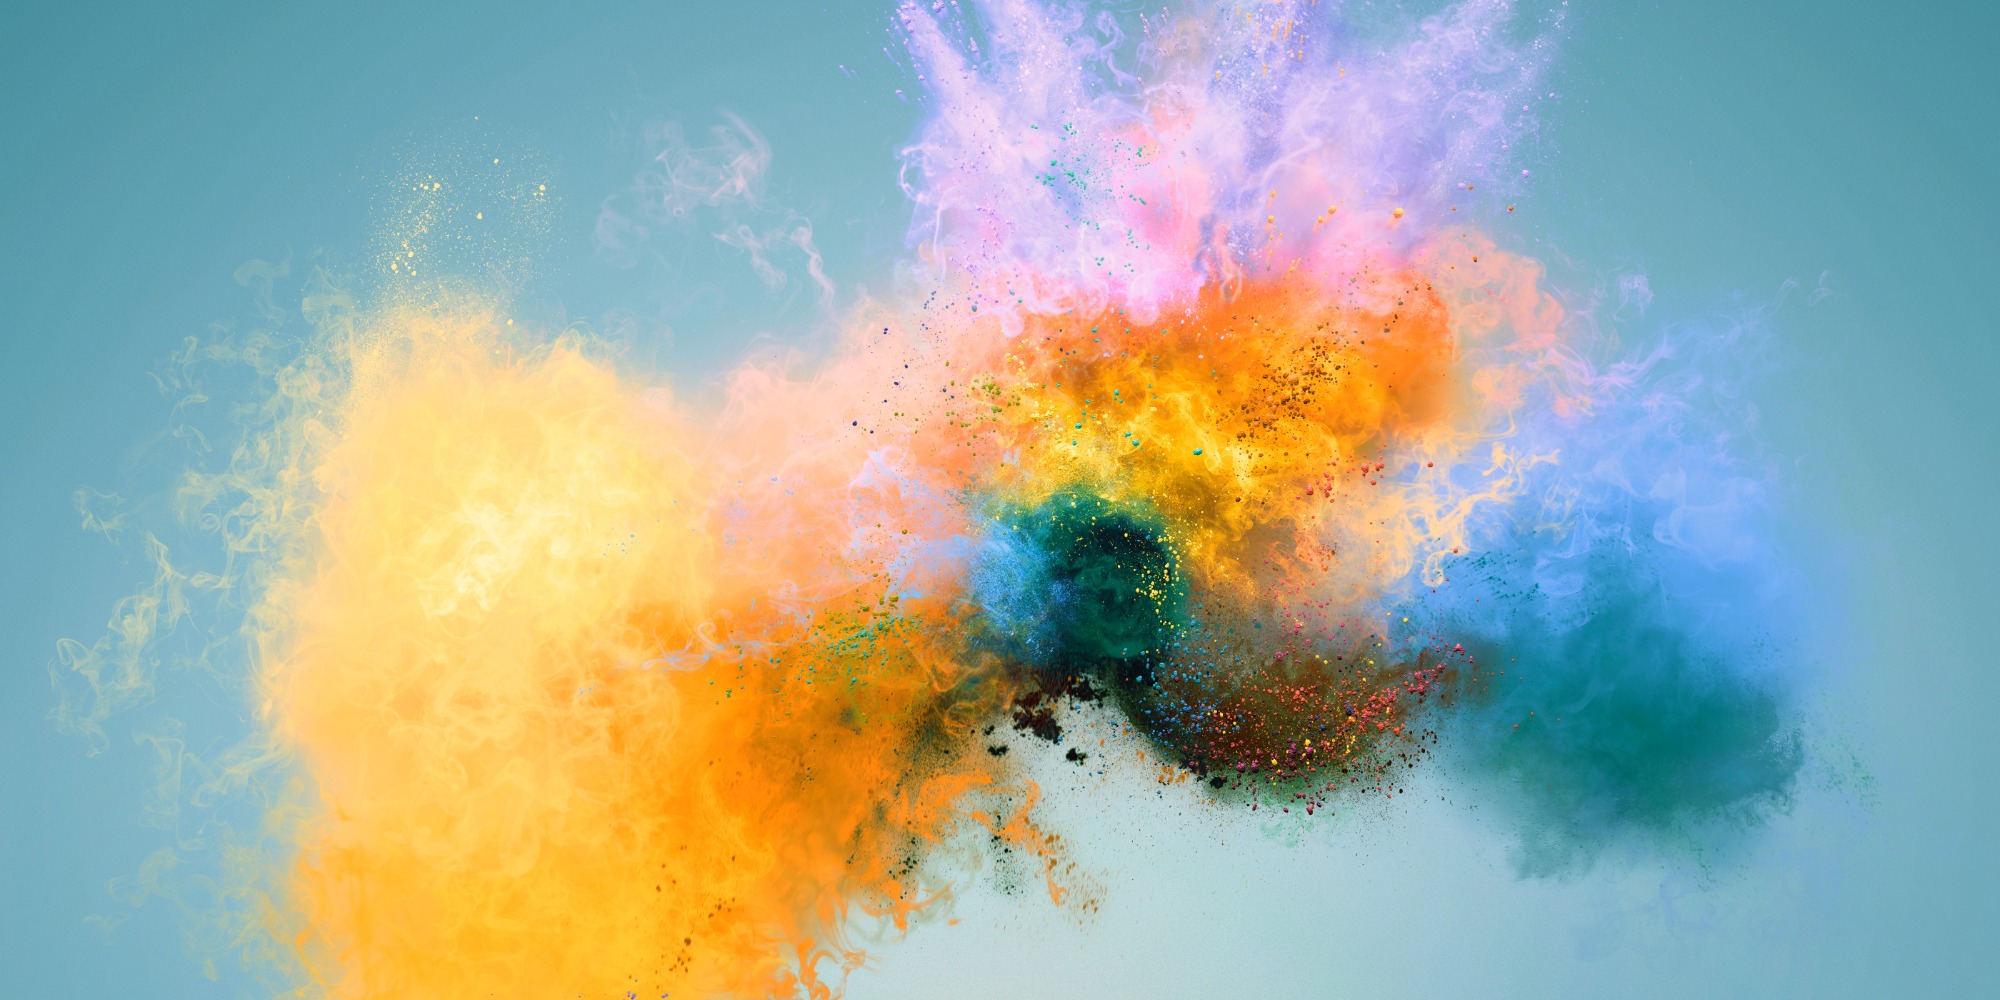 An explosion of colours, yellow, orange, red, purple, blue. All looking like dust particles on a light blue background